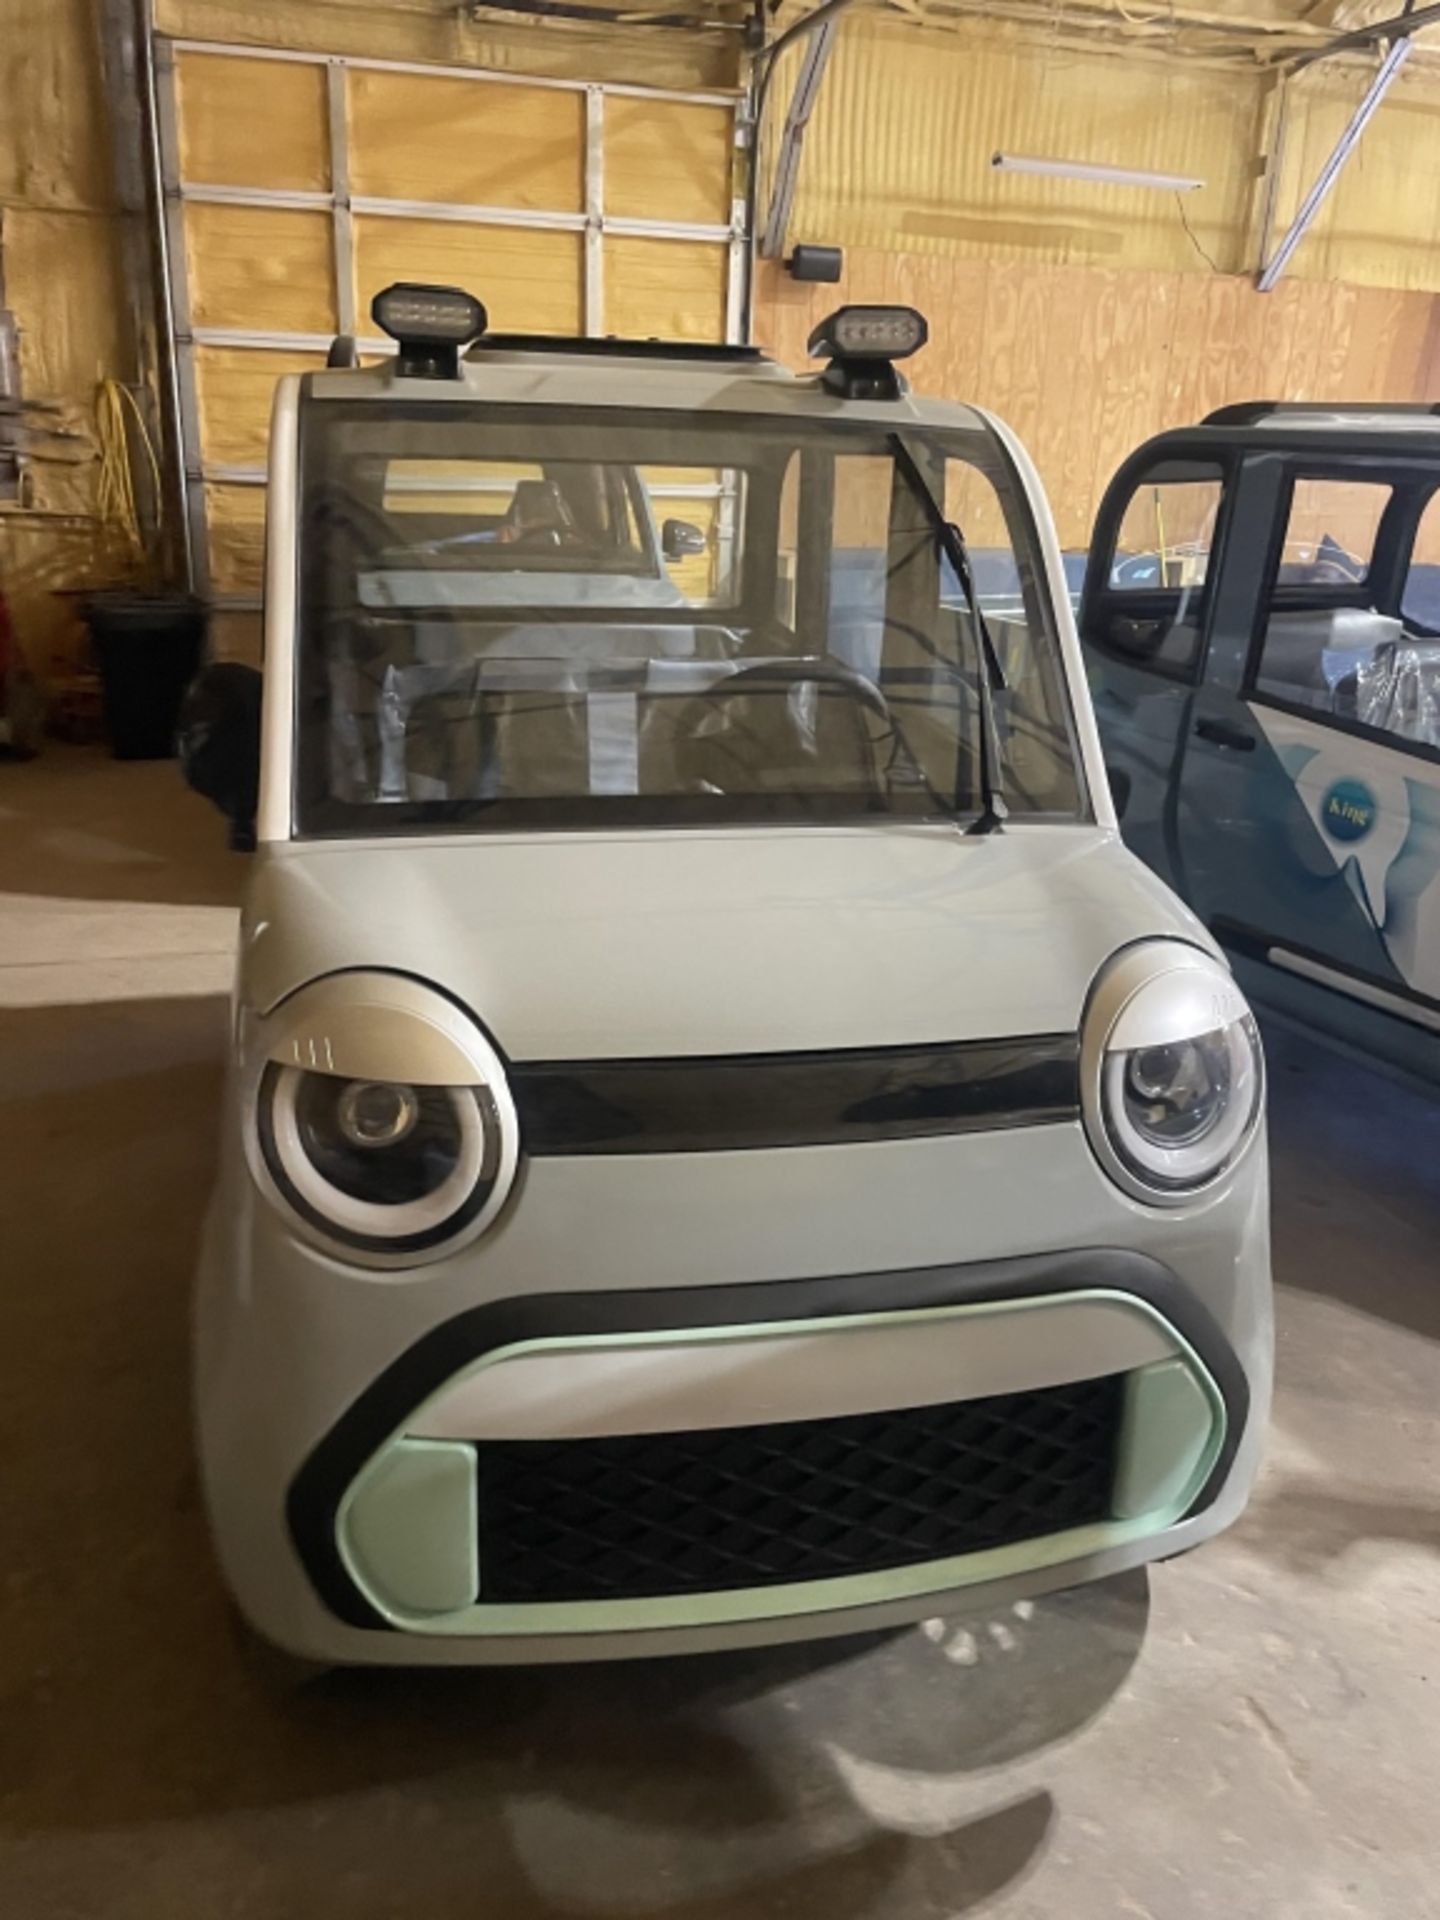 MECO M-F Electric Vehicle - Image 9 of 18